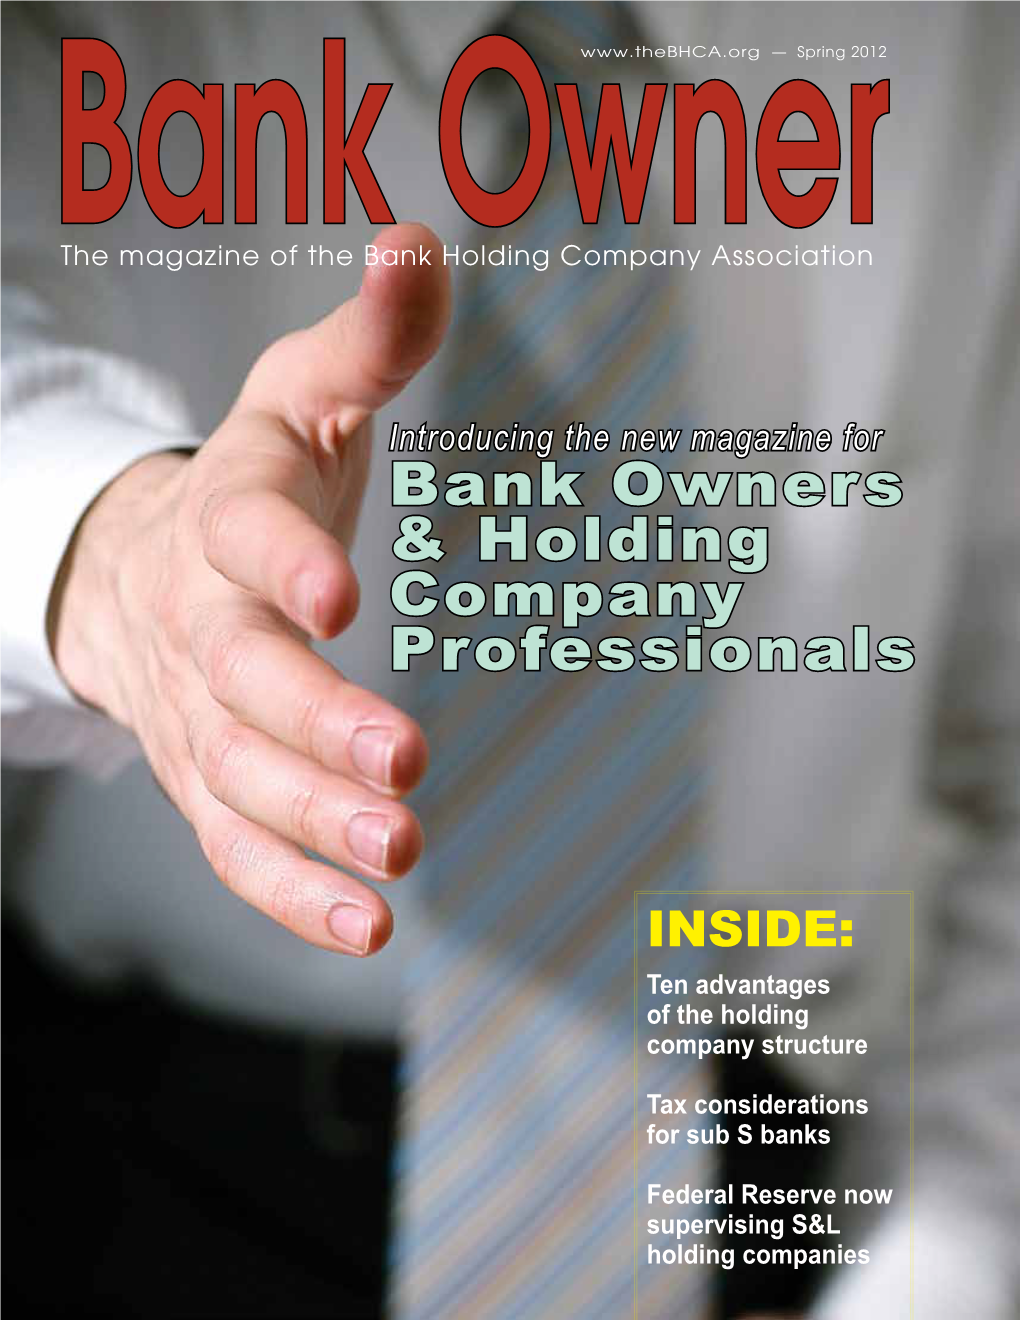 Bank Owners & Holding Company Professionals